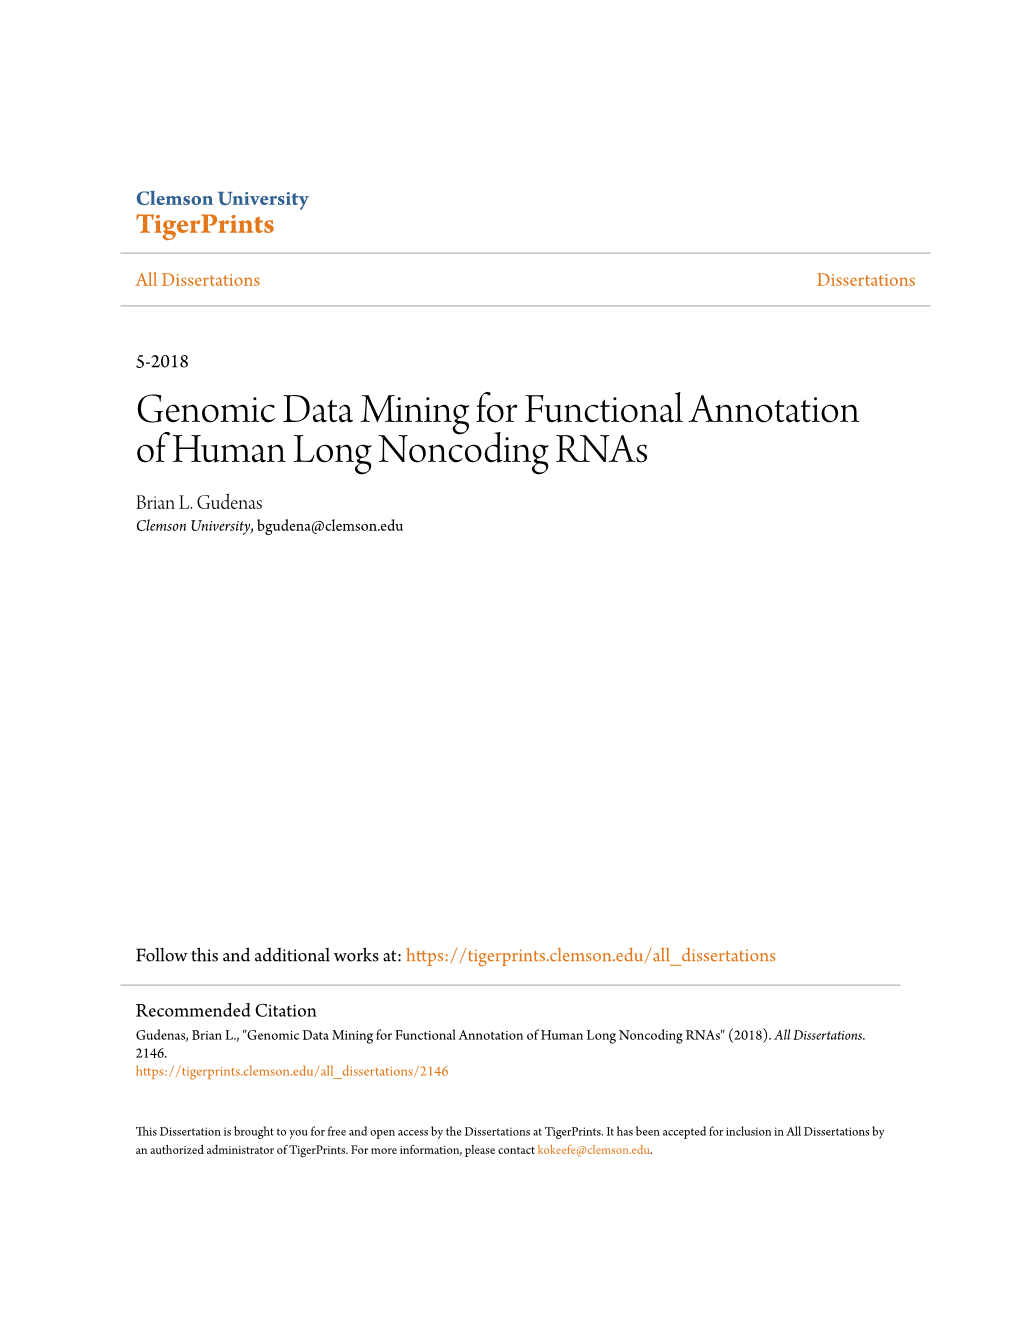 Genomic Data Mining for Functional Annotation of Human Long Noncoding Rnas Brian L